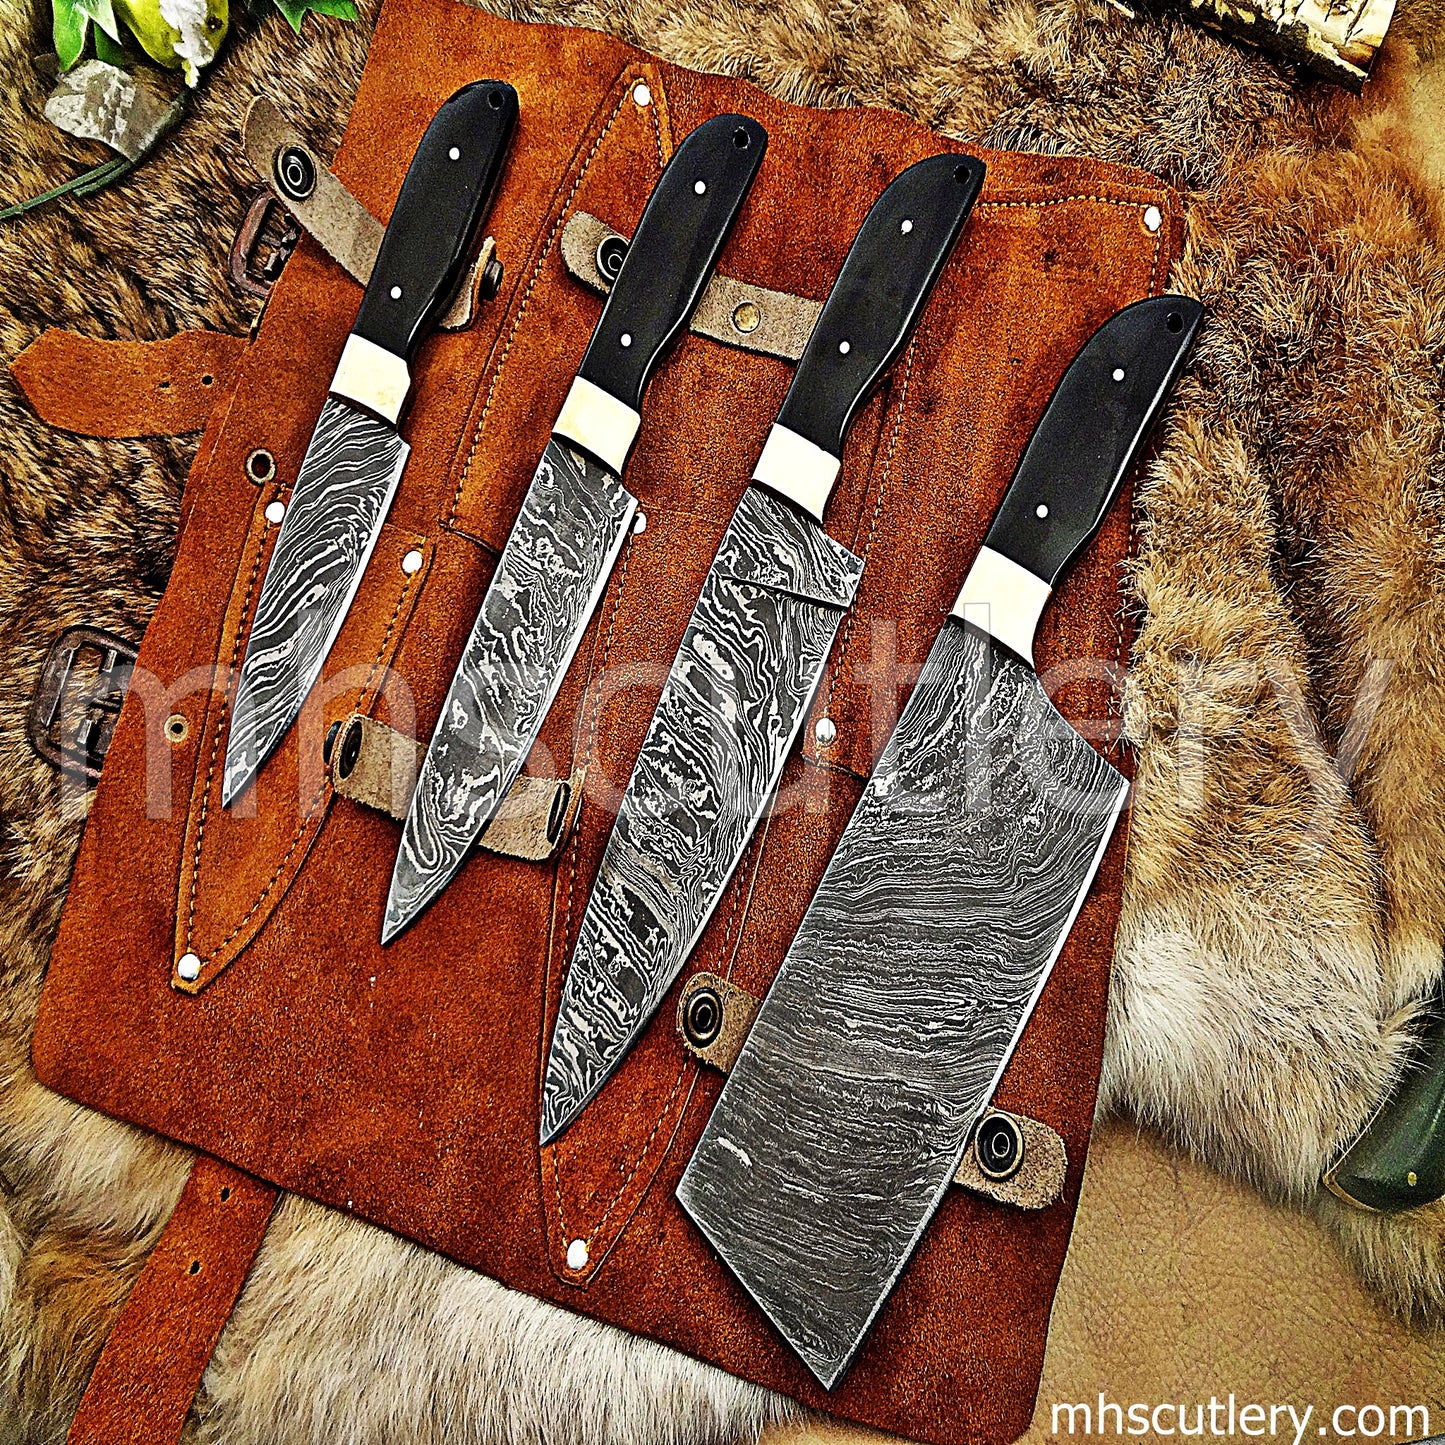 Hand Forged Damascus Steel Chef Set / 4 Pcs | mhscutlery